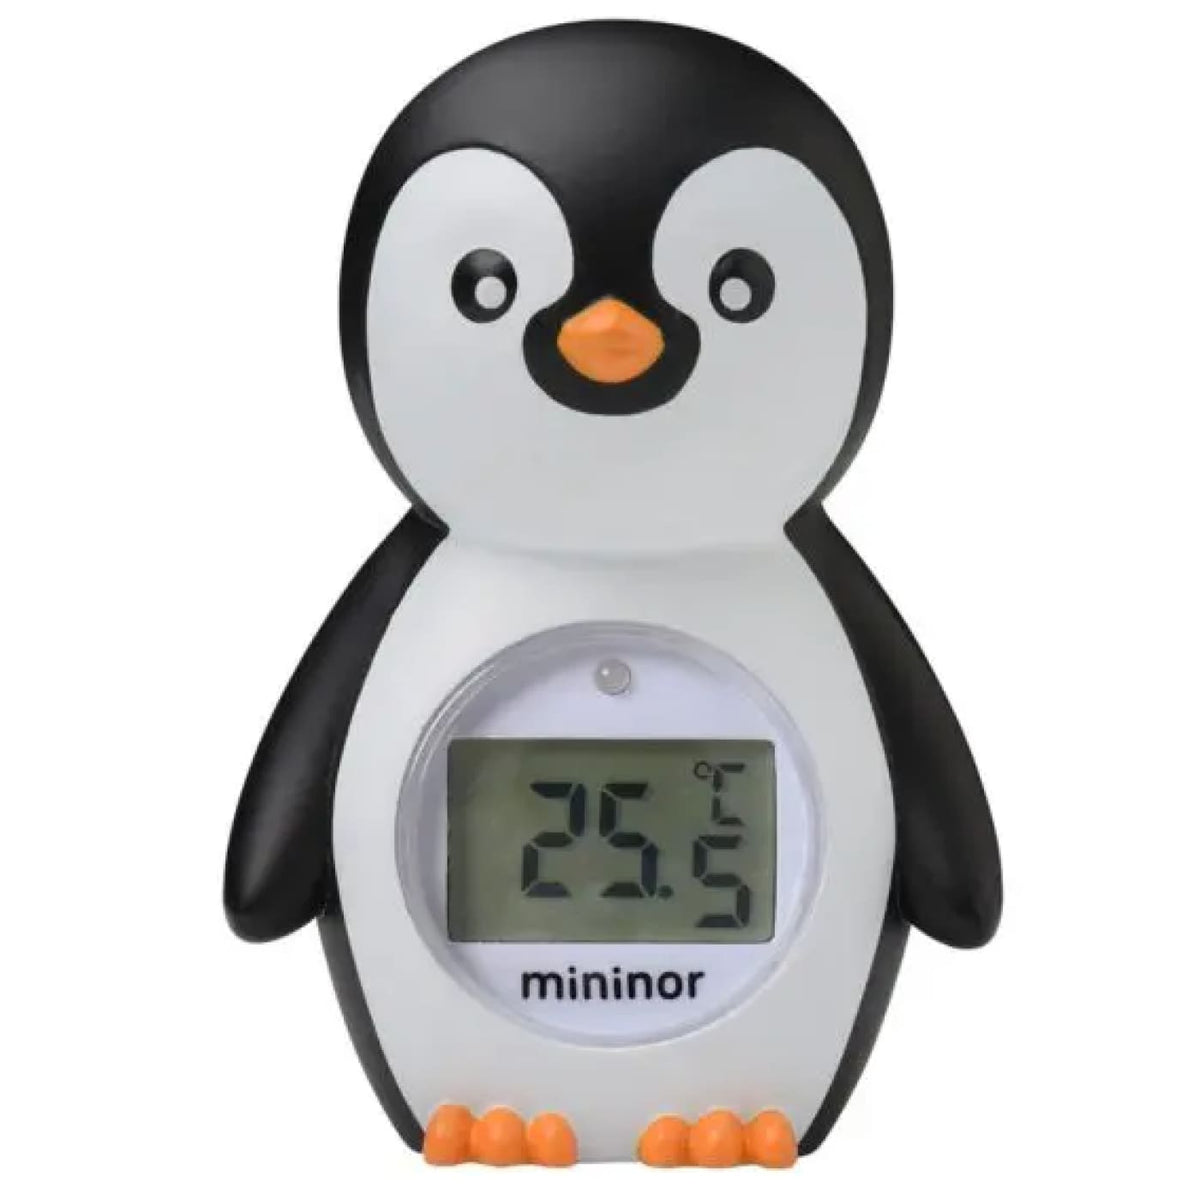 Mininor Bath Thermometer - Penguin - Penguin - HEALTH &amp; HOME SAFETY - THERMOMETERS/MEDICINAL